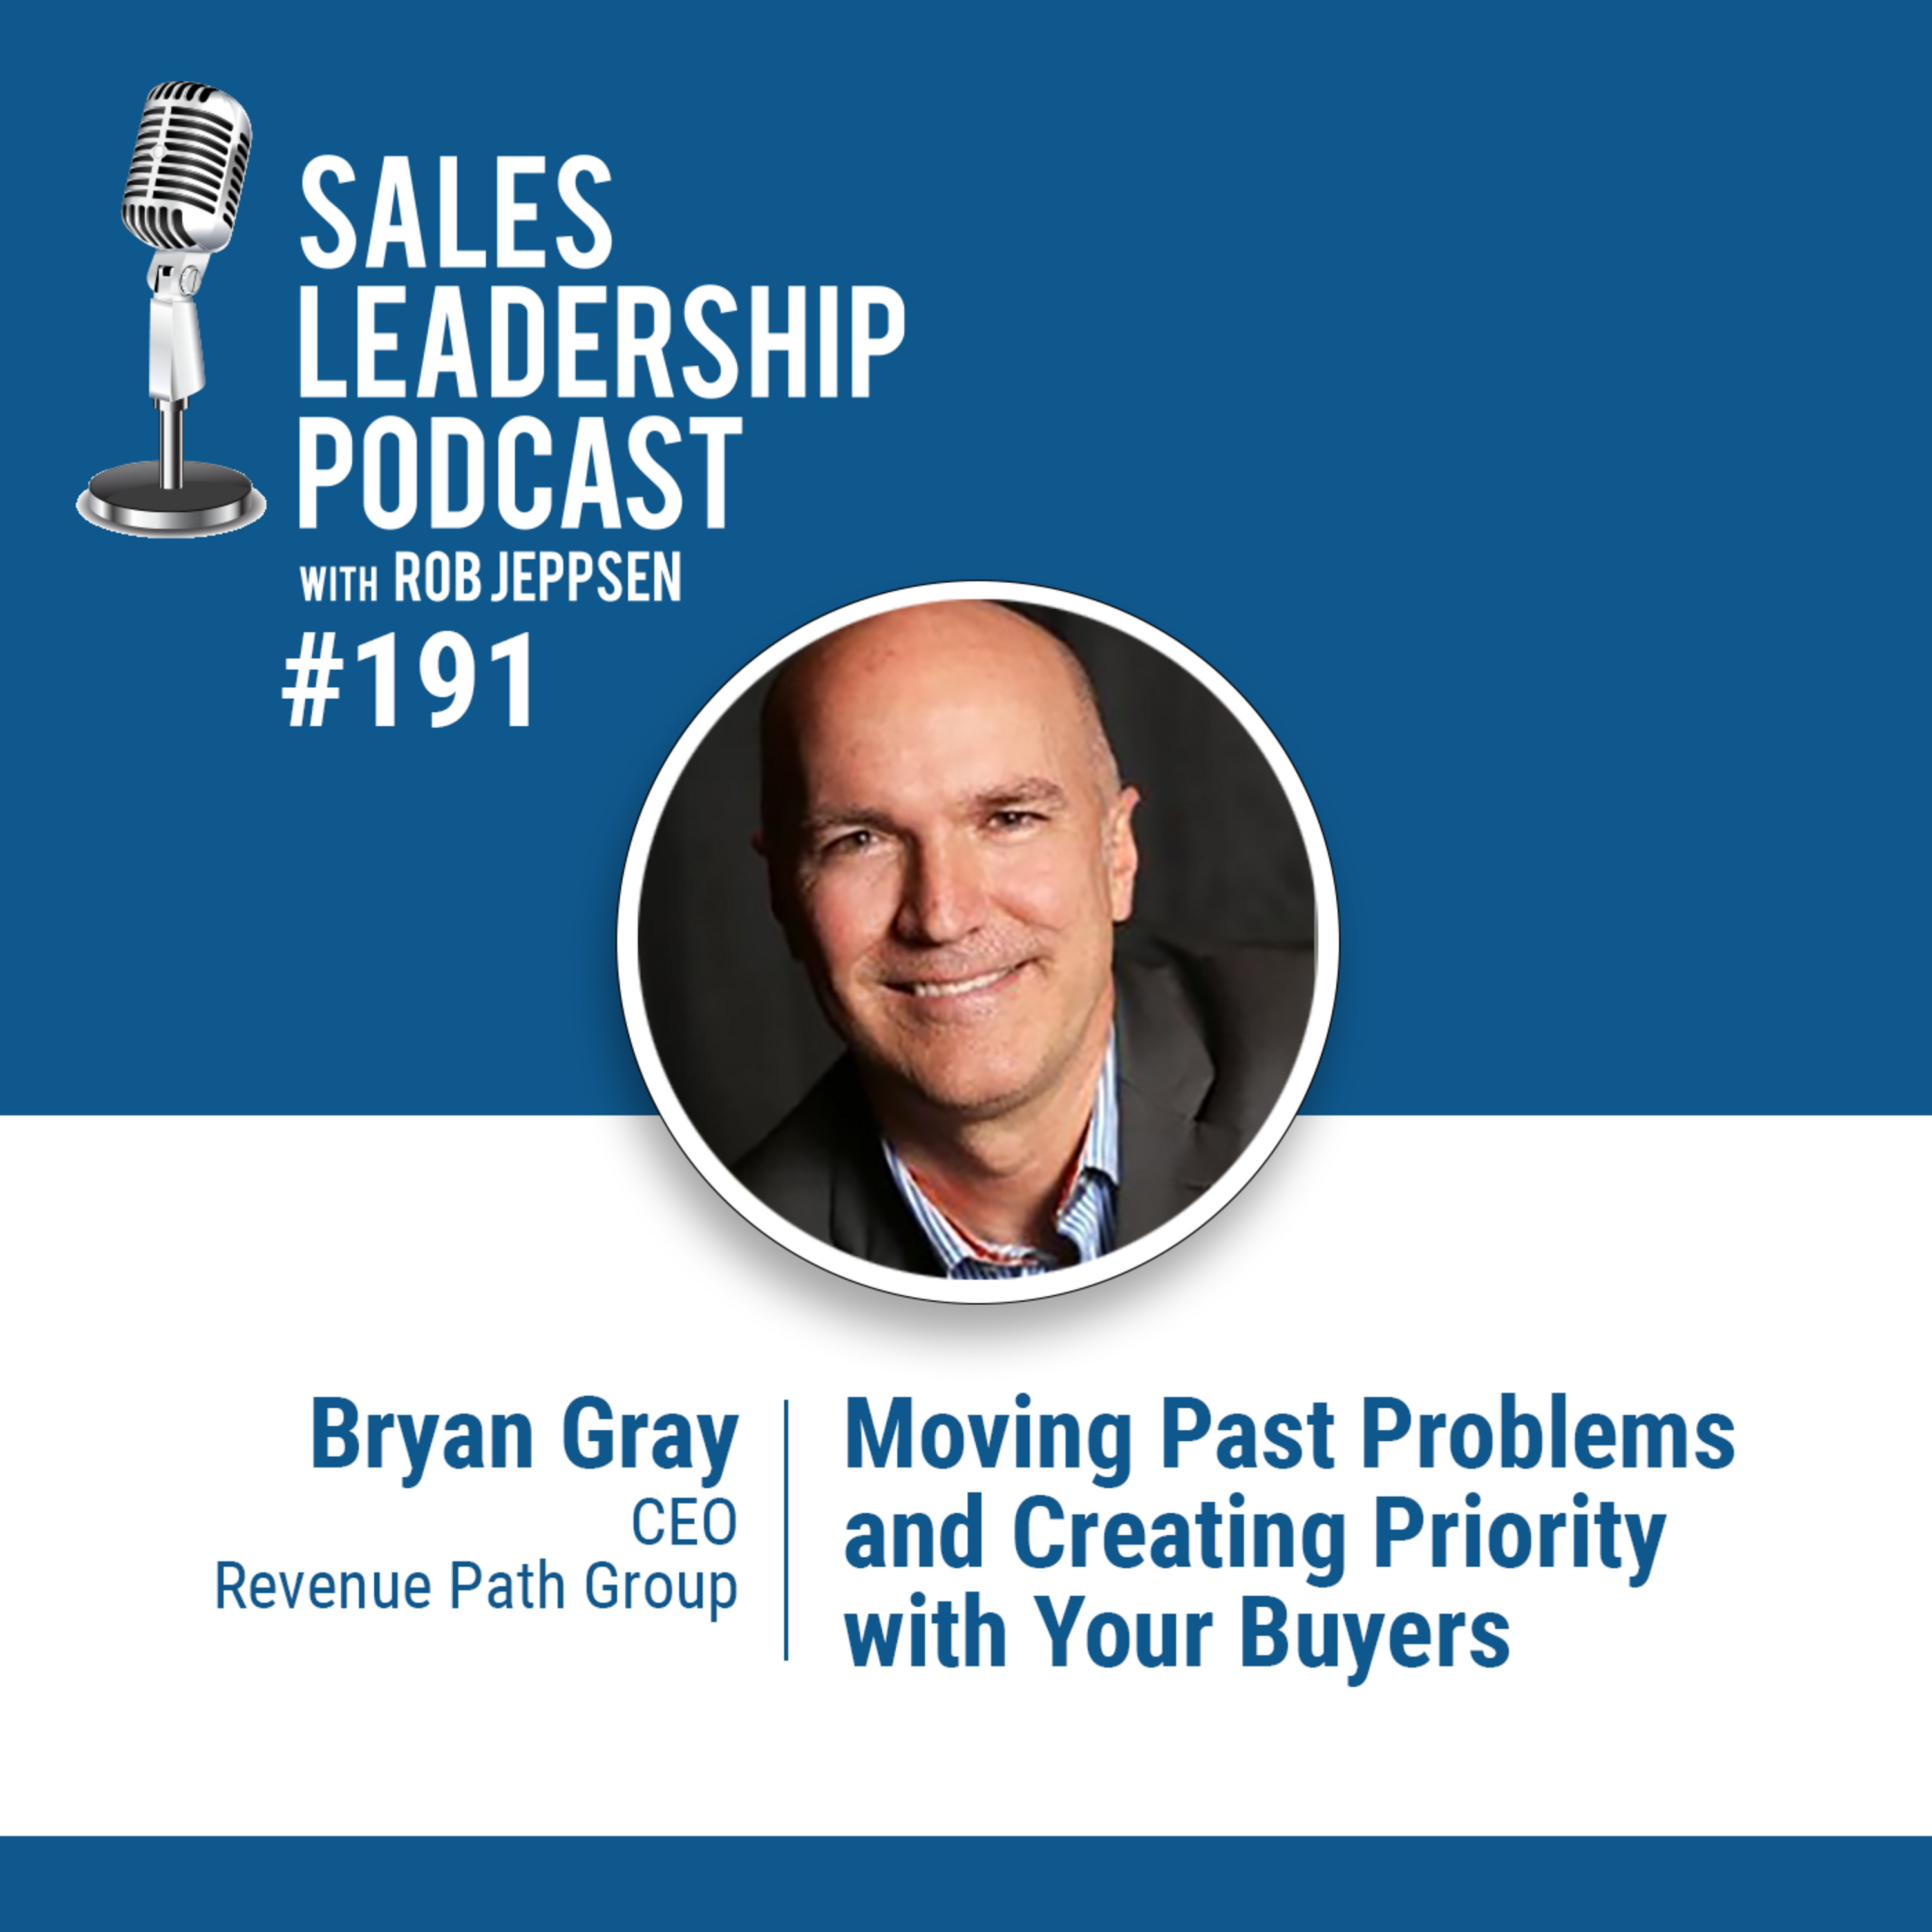 Episode 192: #191: Bryan Gray of the Revenue Path Group — Moving Past Problems and Creating Priority with Your Buyers